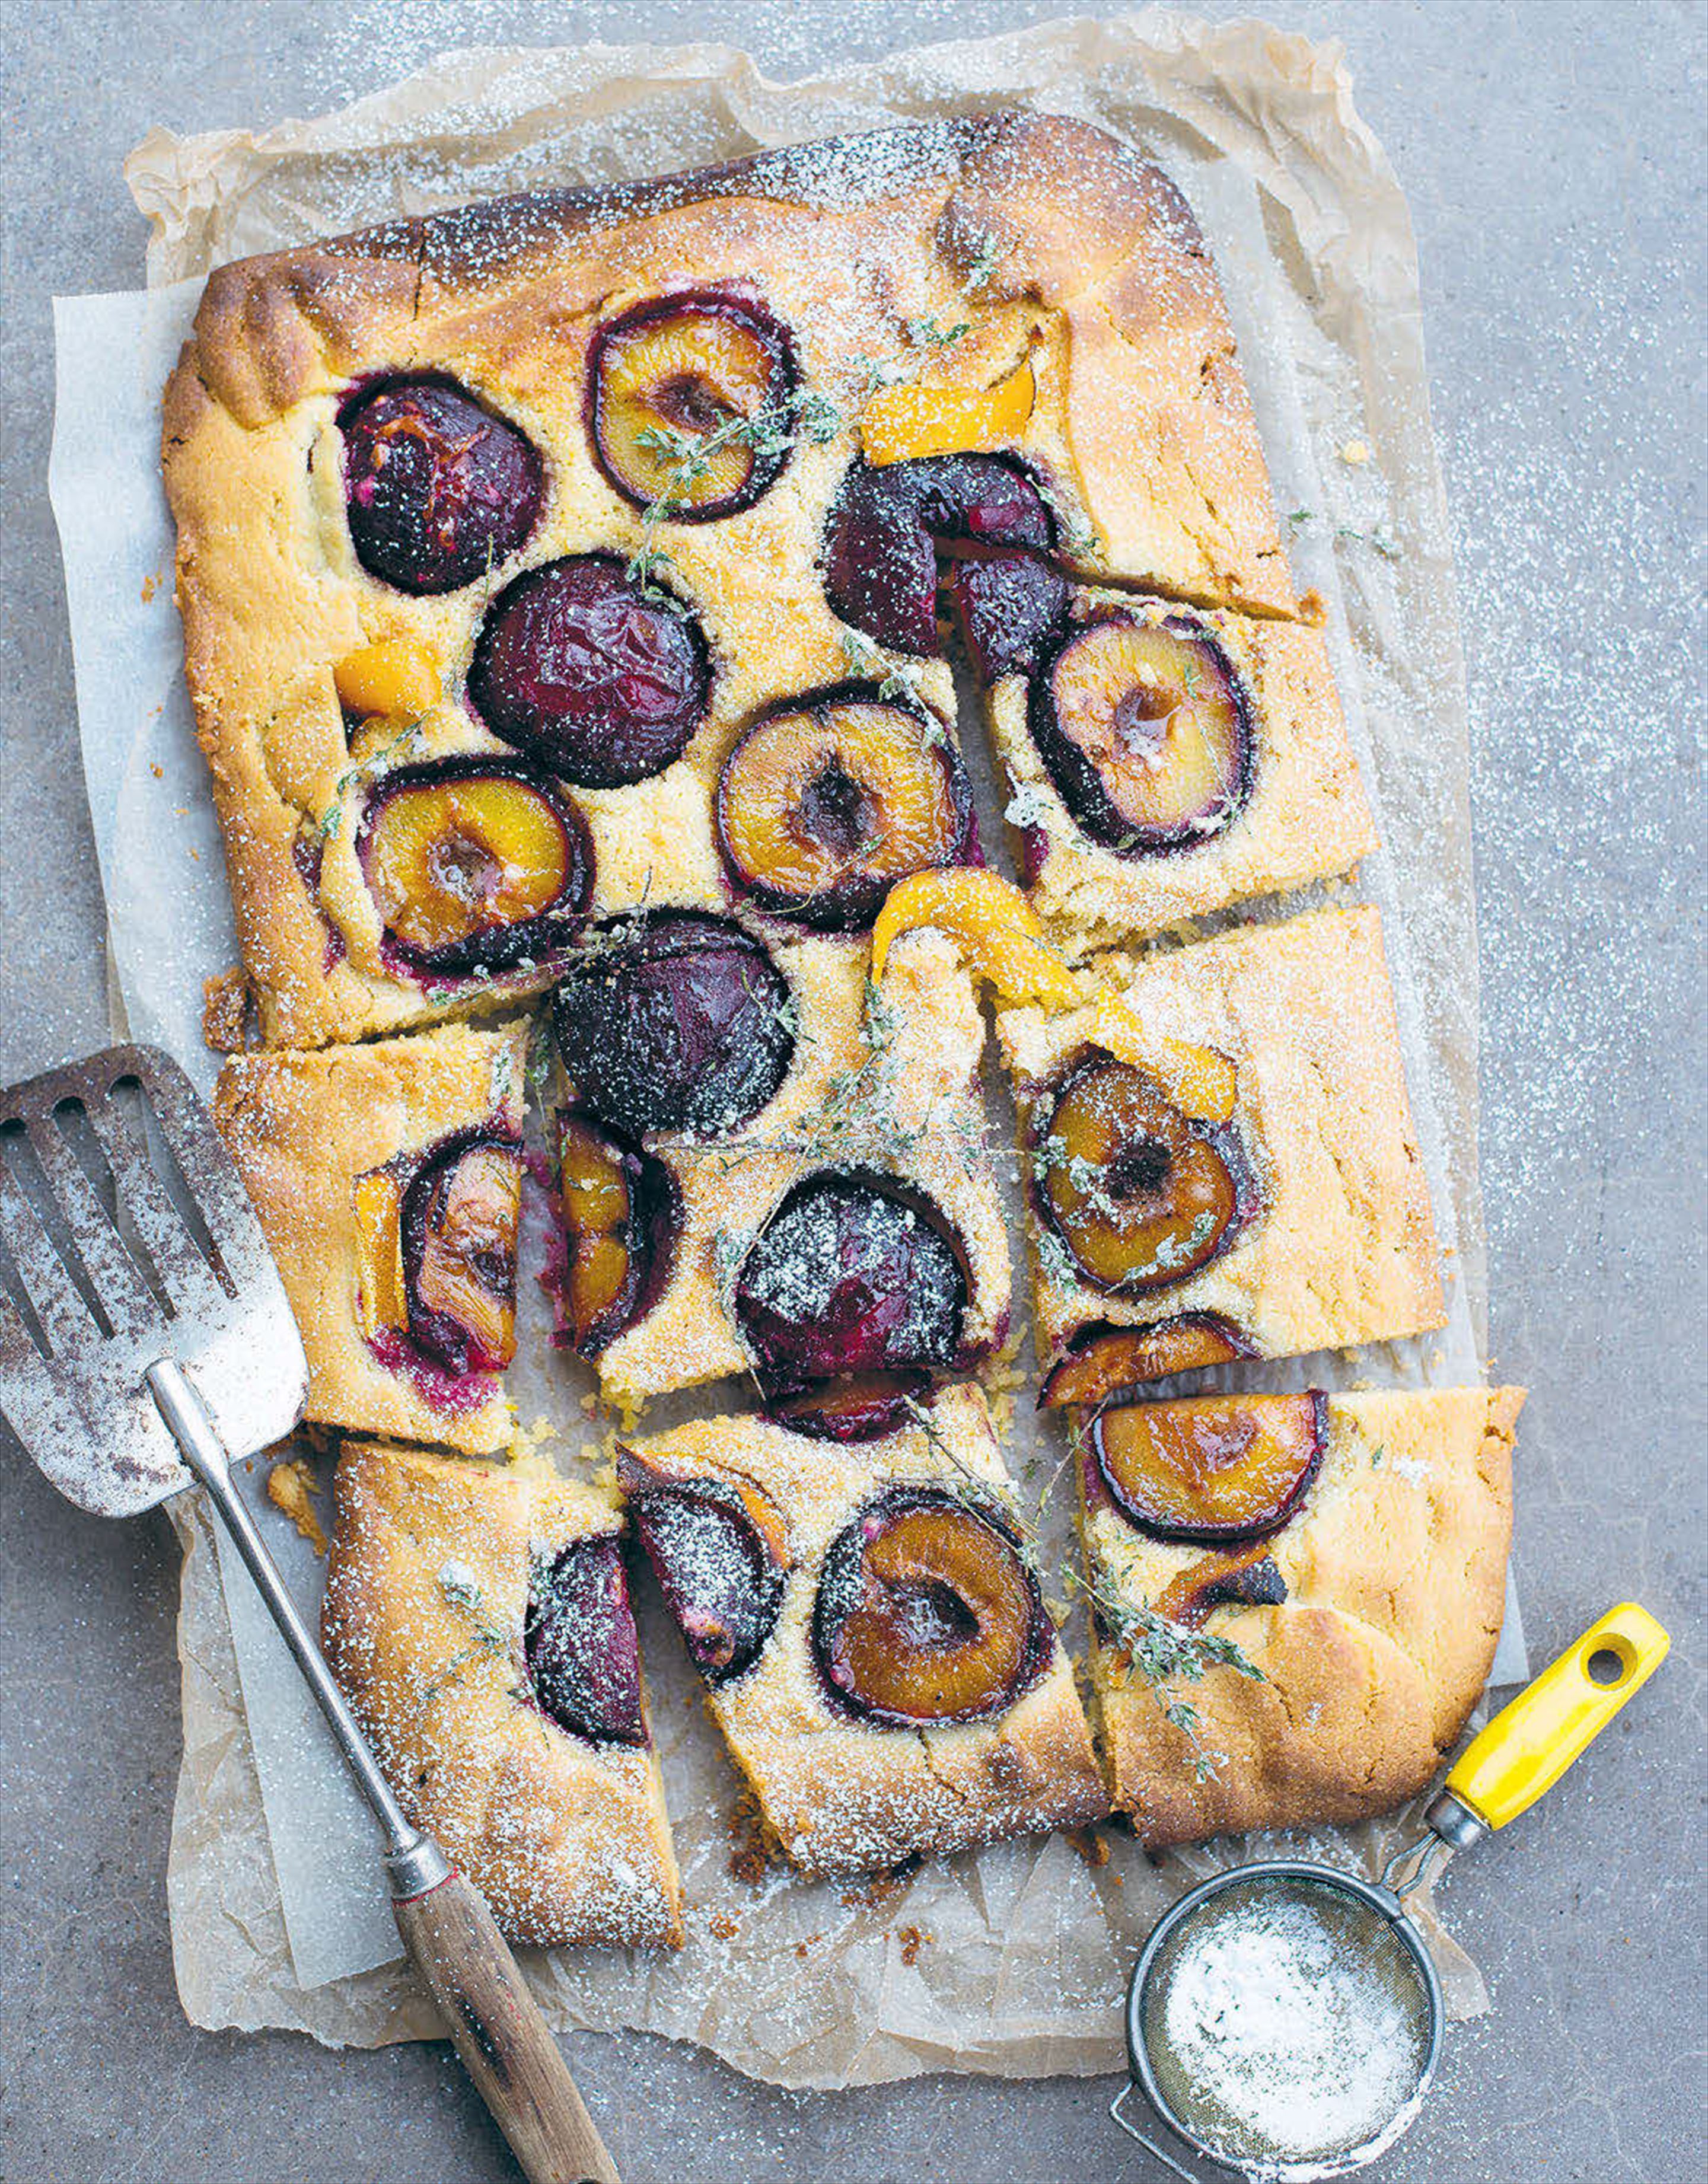 Plum, almond and orange blossom crostata with sugared thyme